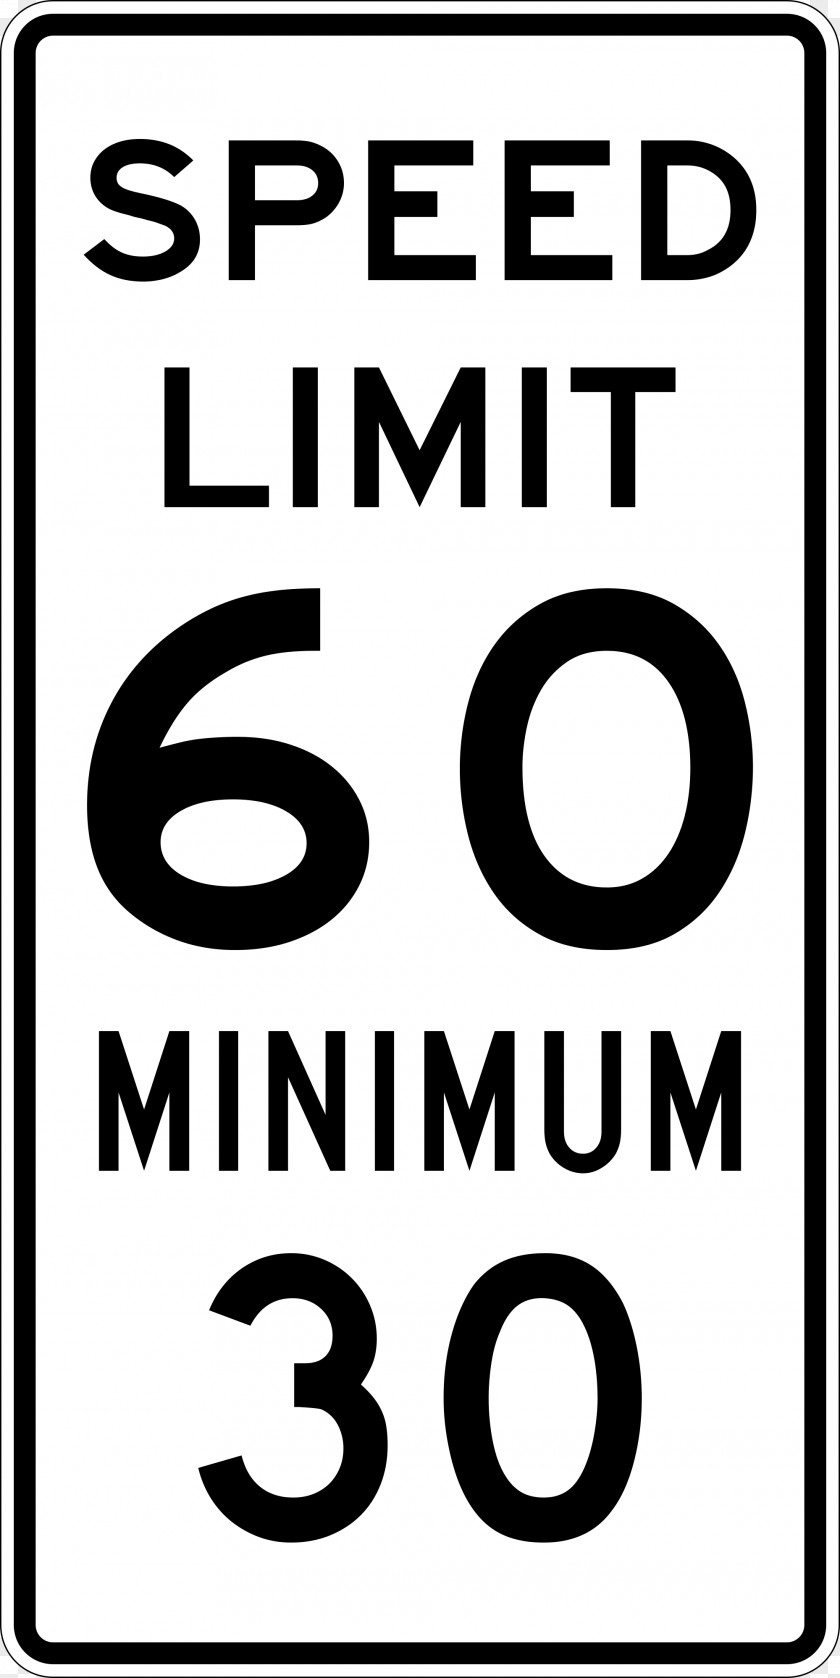 22 Speed Limit Traffic Sign Car PNG